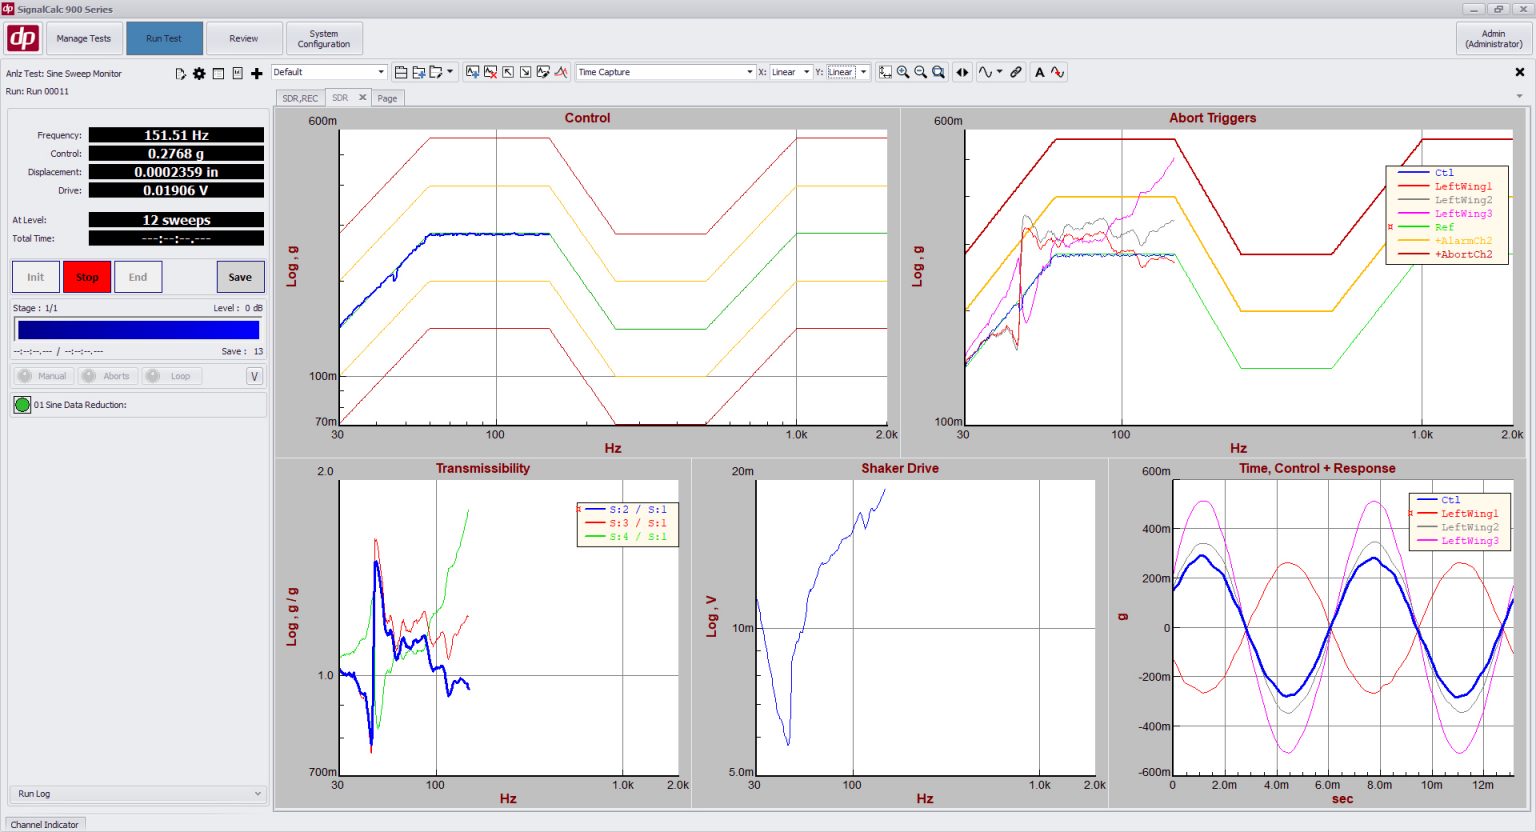 SignalCalc Sine Data Reduction is used during a swept sine test under the direction of a vibration controller, providing additional measurement channels to supplement the controller.